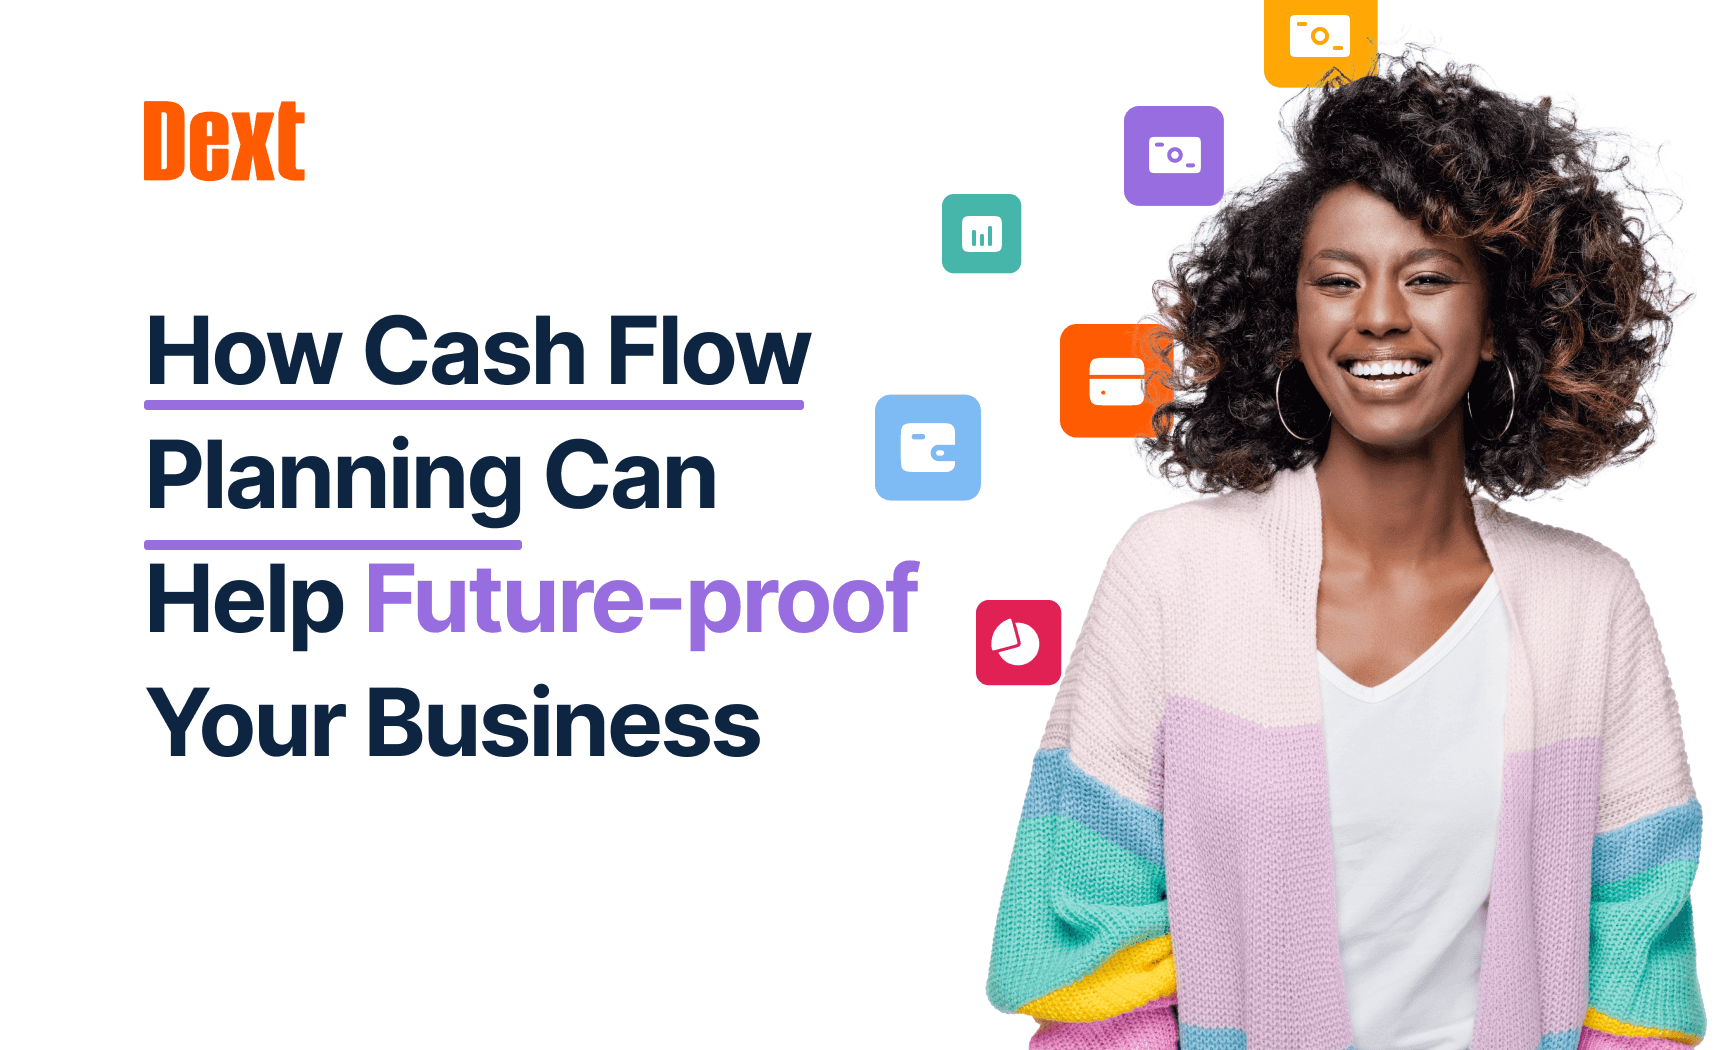 How Cash Flow Planning Can Help Future-Proof Your Business